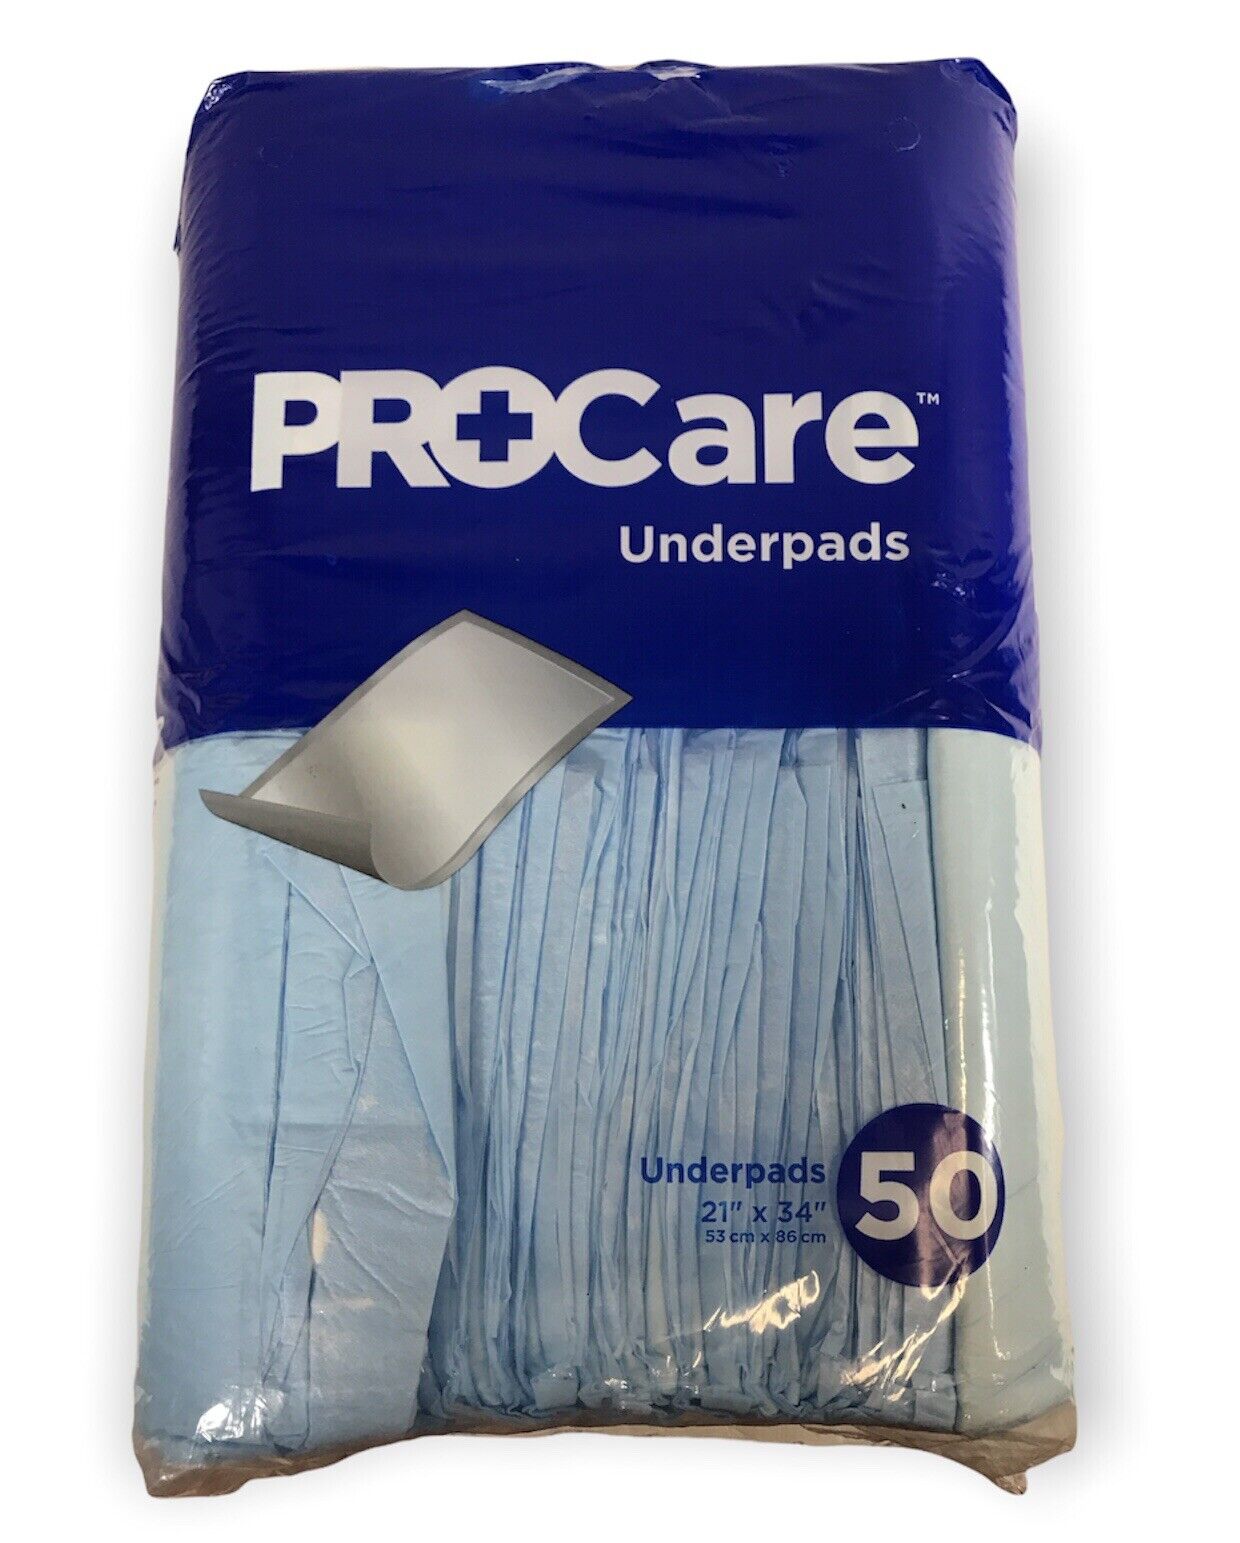 PROCare Underpads 21" x 34" Pack of 50